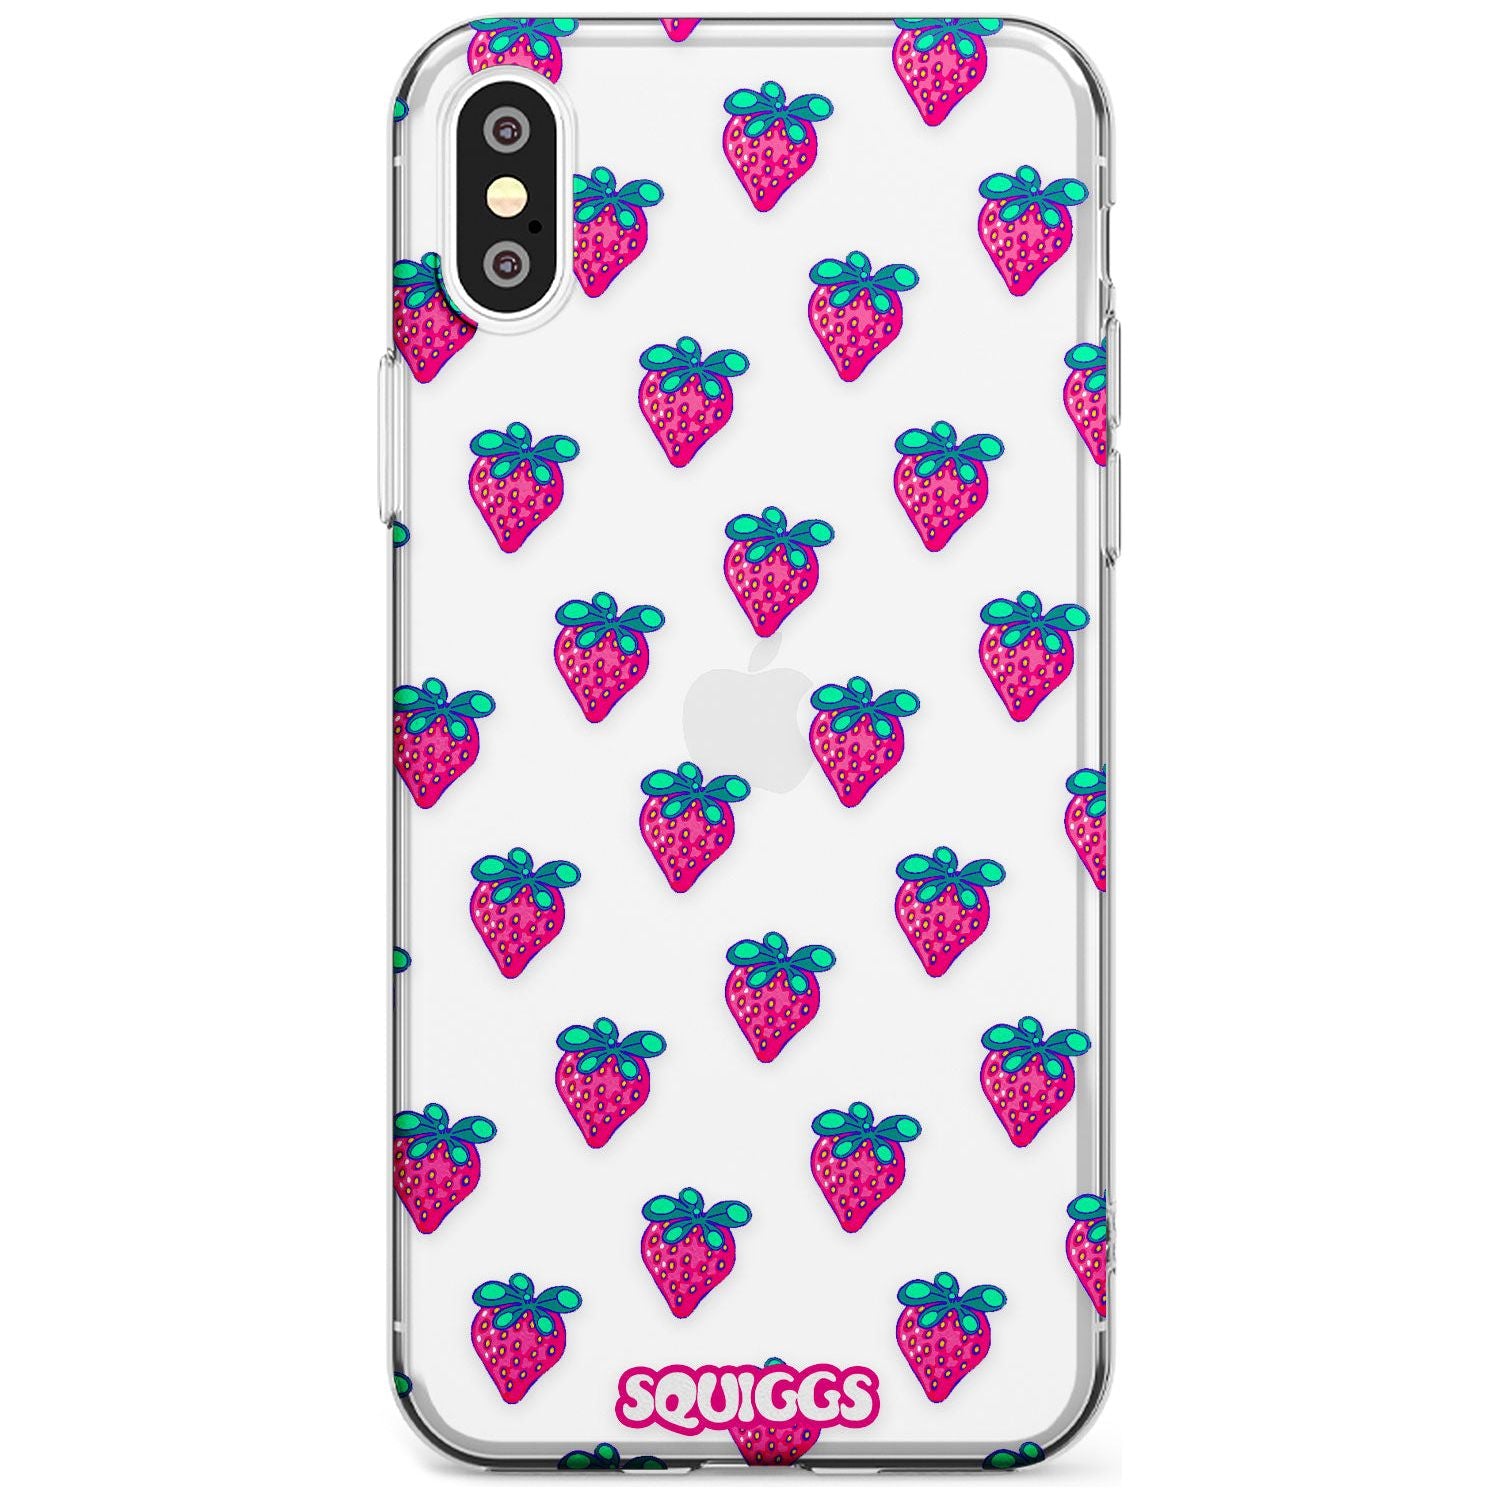 Strawberry Patch Black Impact Phone Case for iPhone X XS Max XR